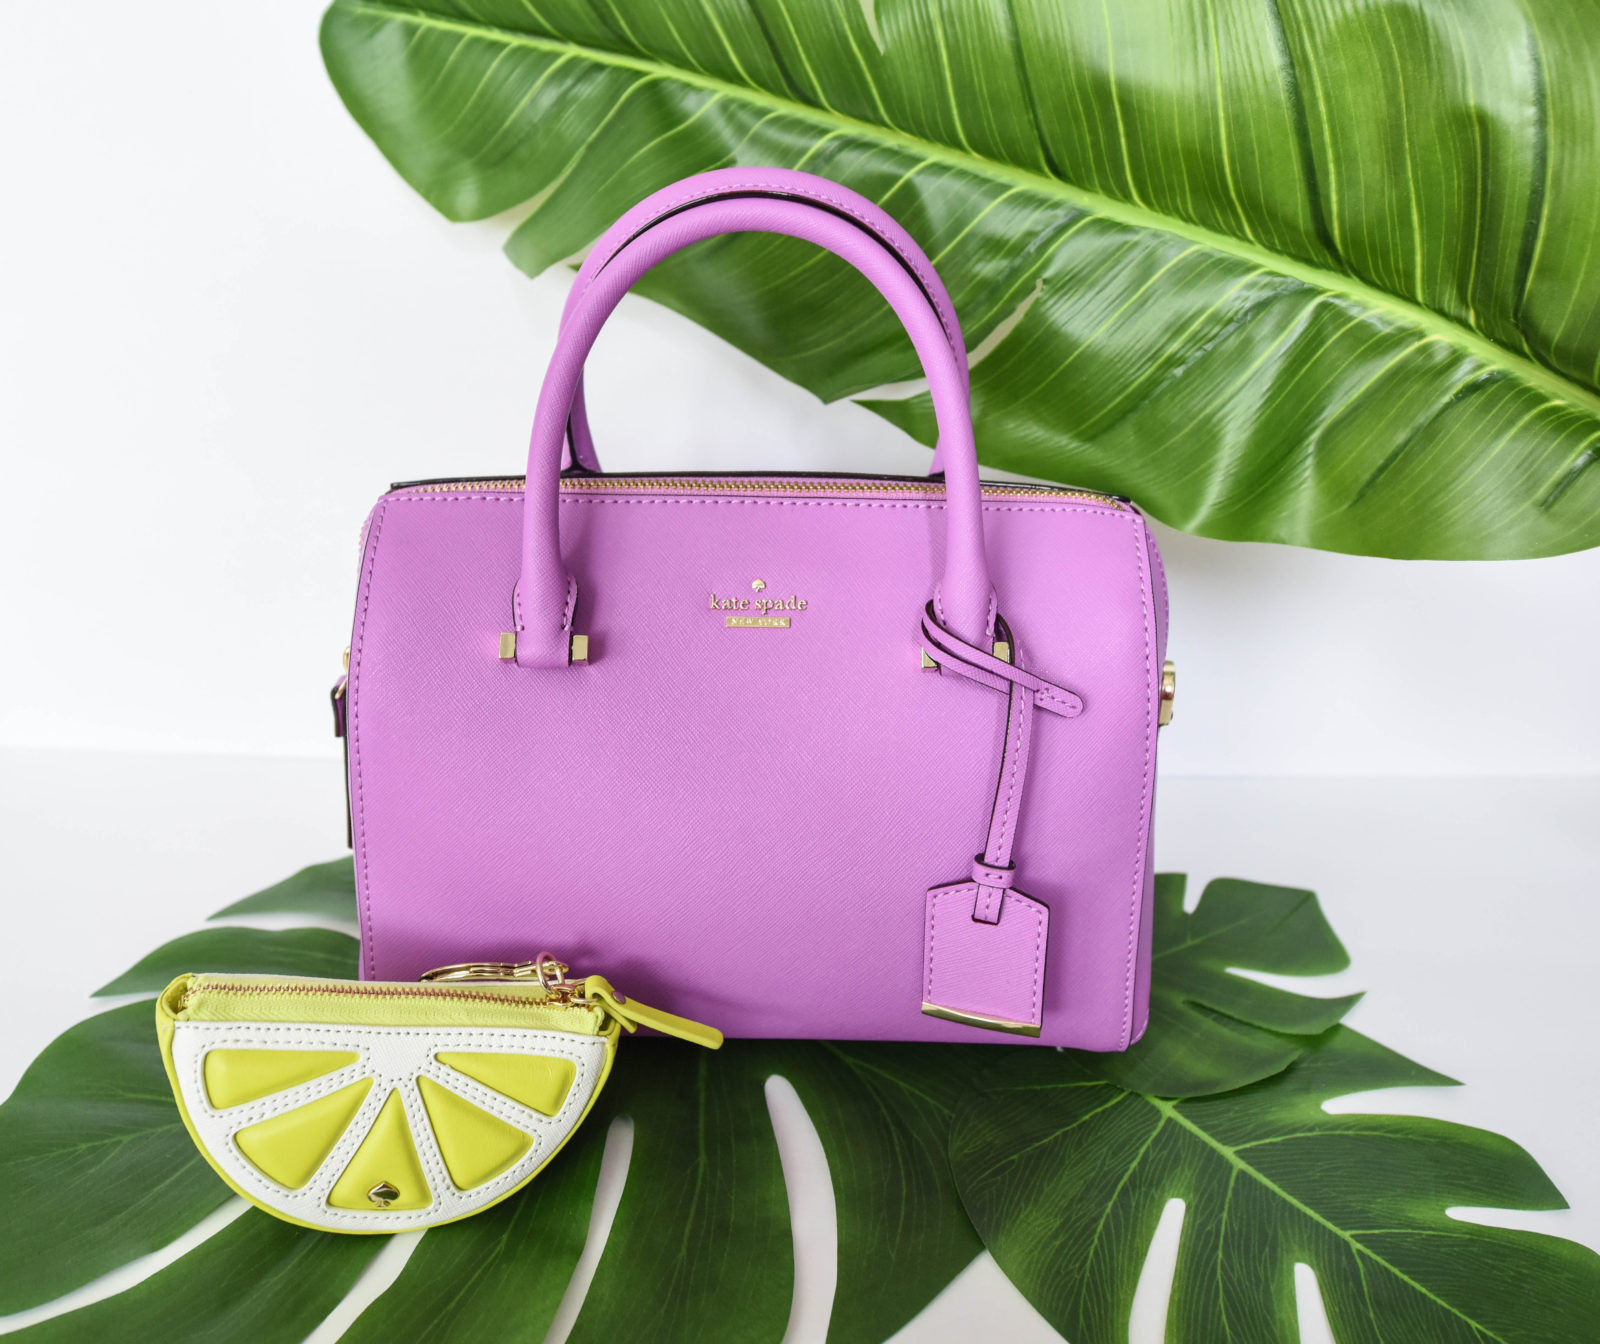 Kate Spade New York Spring & Summer Purses and Accessories